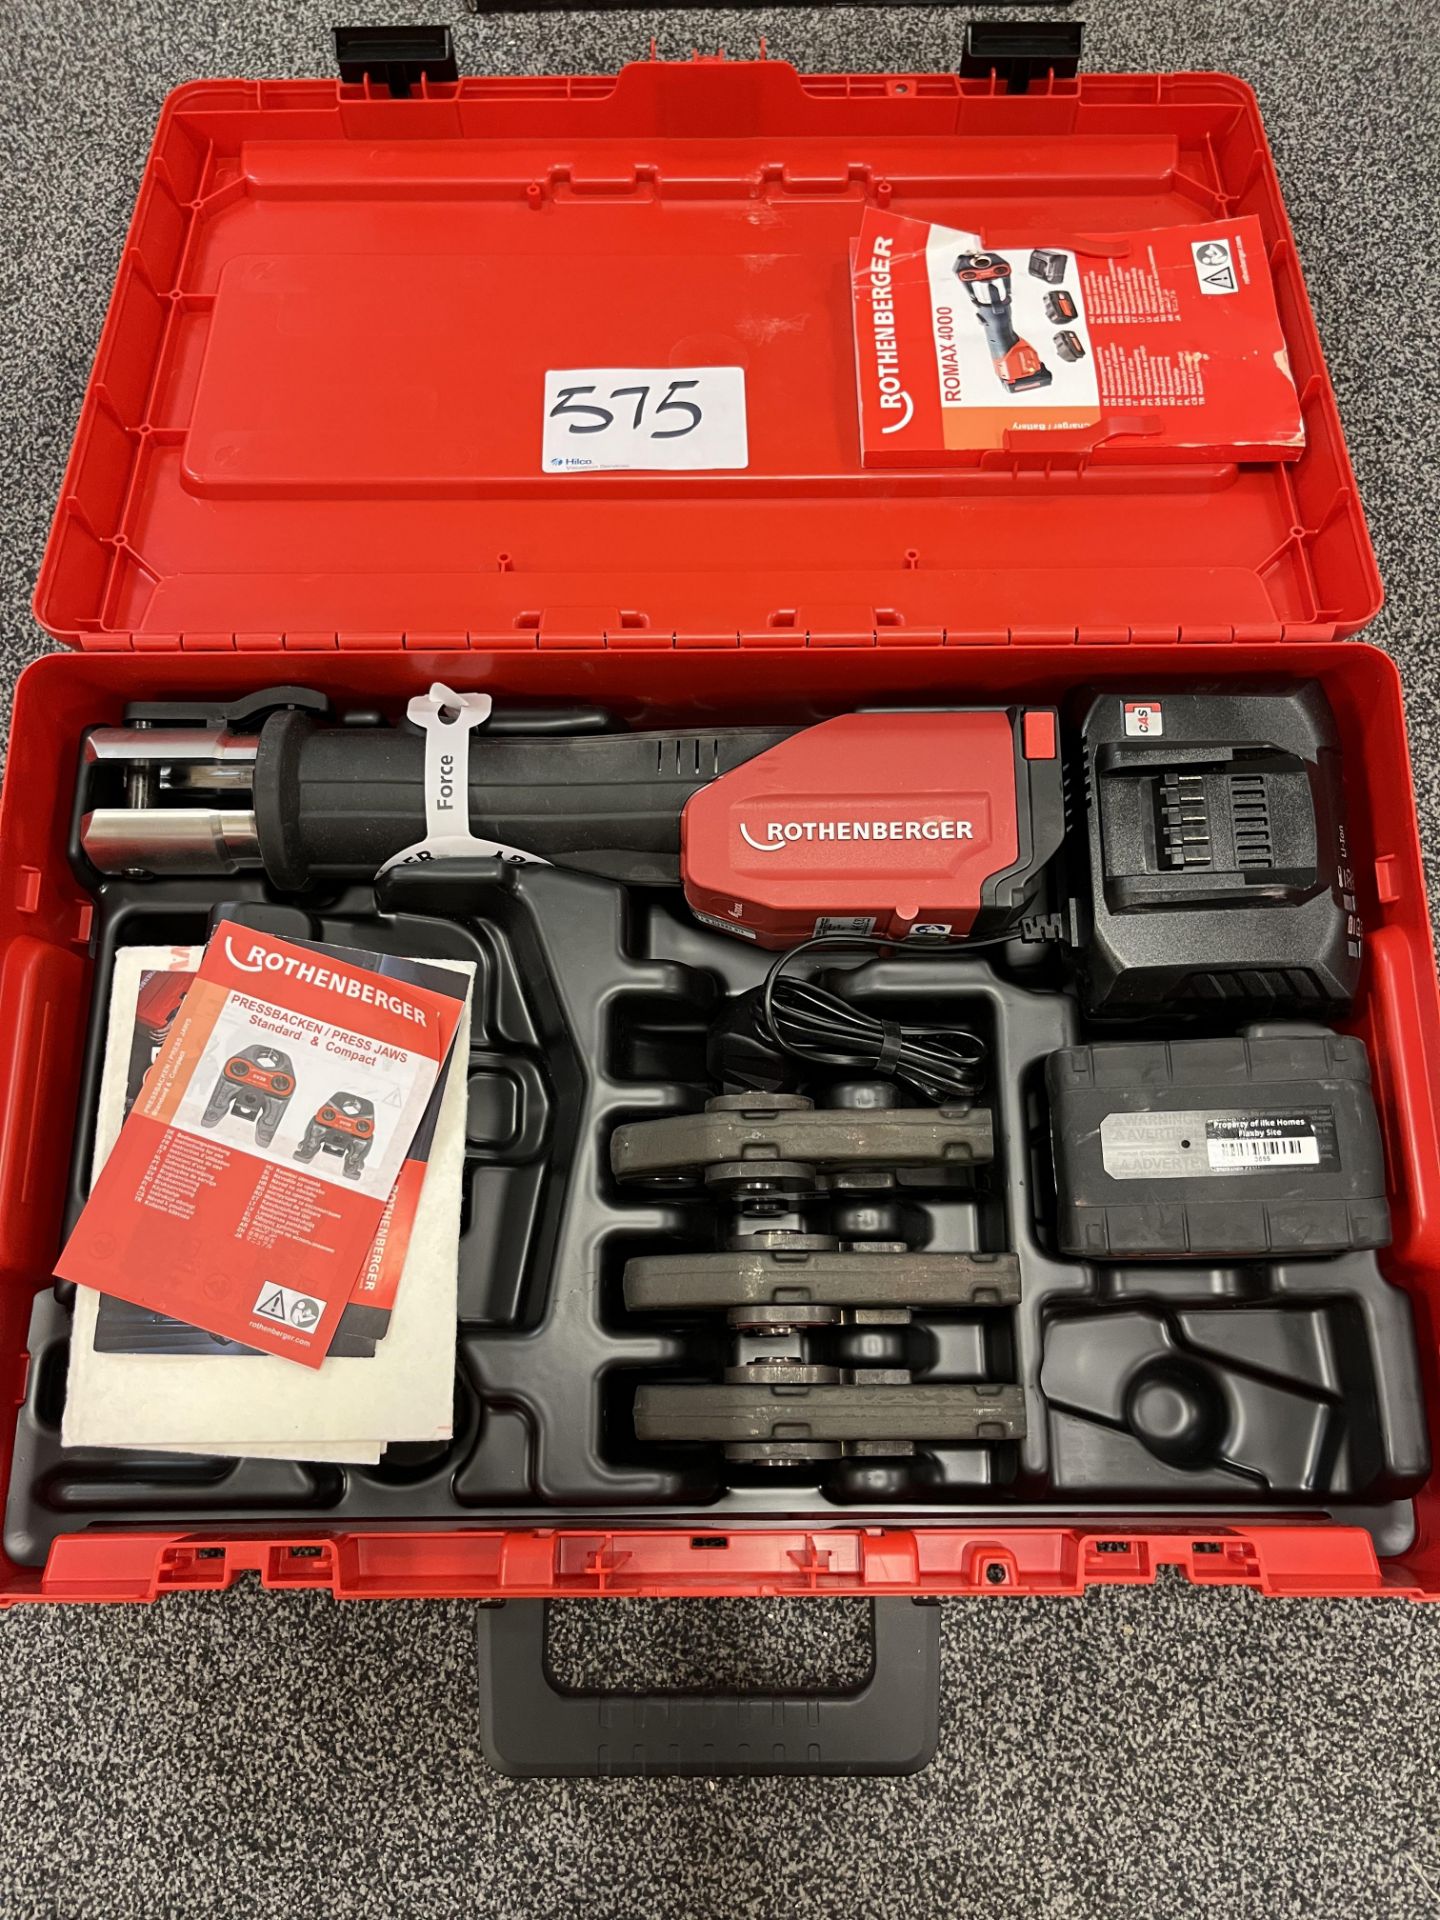 Rothenbierger ROMAX 4000 Cordless Press with 3 Jaws and Battery Charger